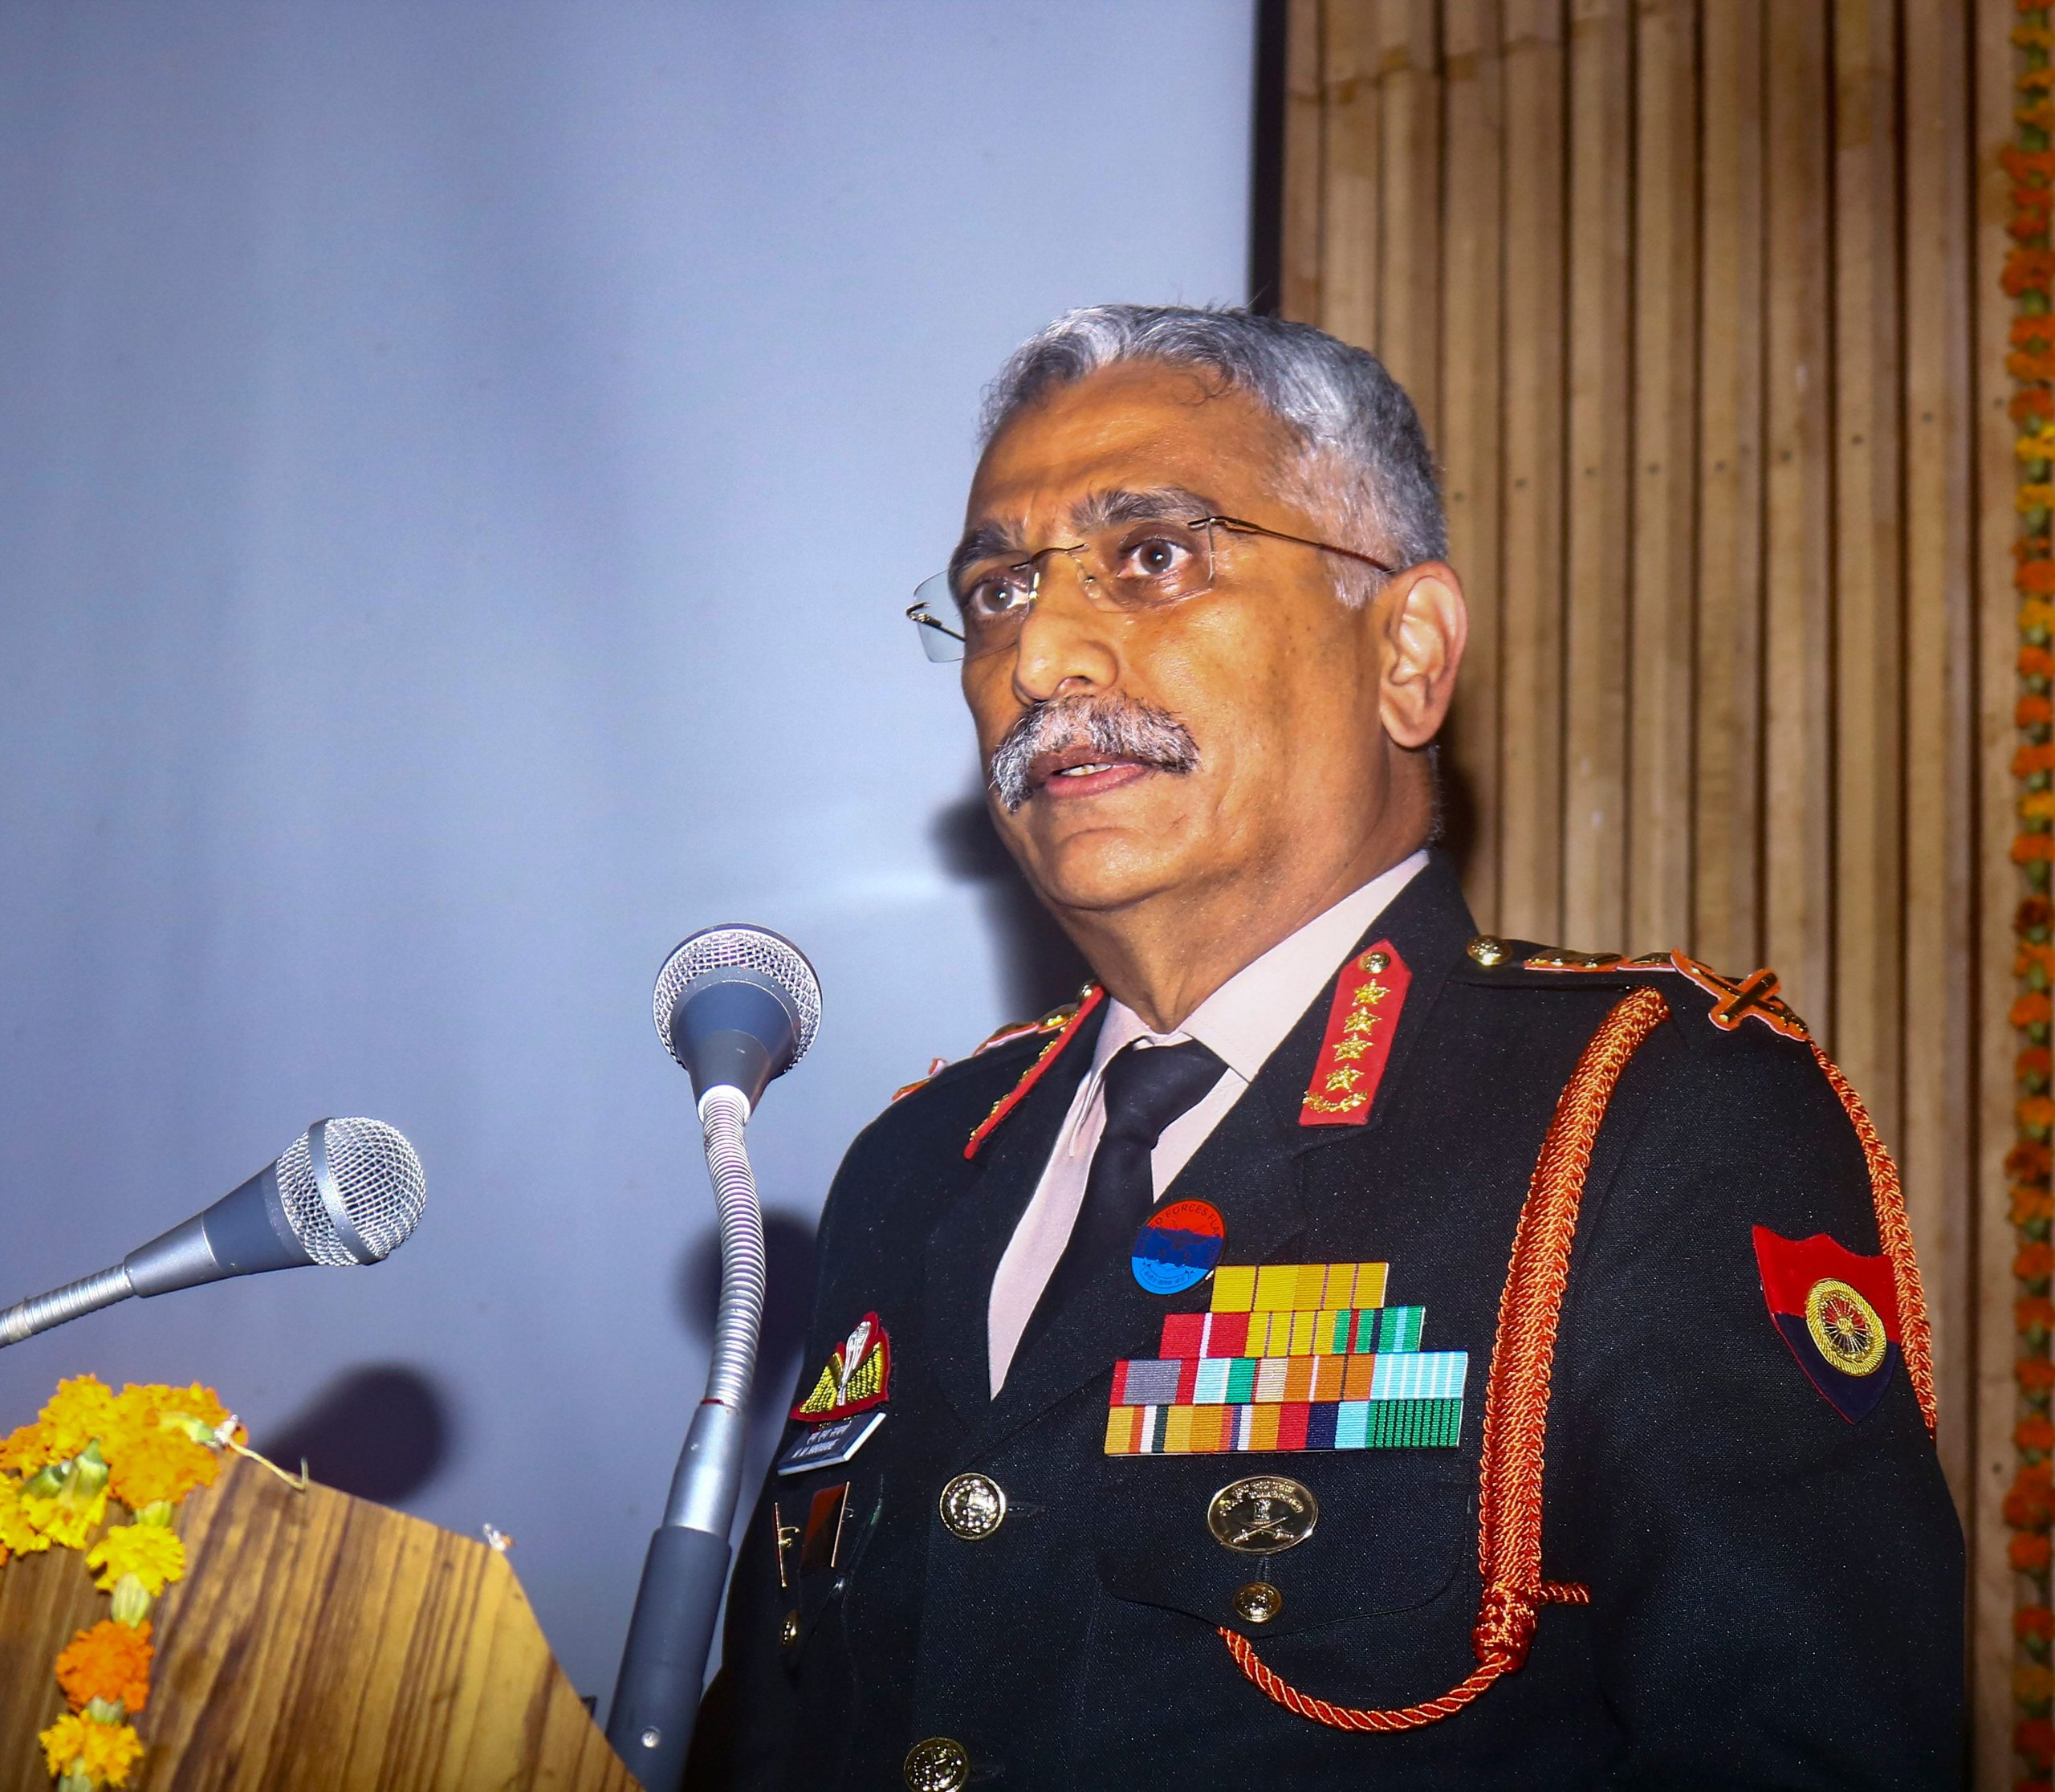 Our desire for peace shouldn’t be mistaken: Army Chief General MM Narvane on China standoff